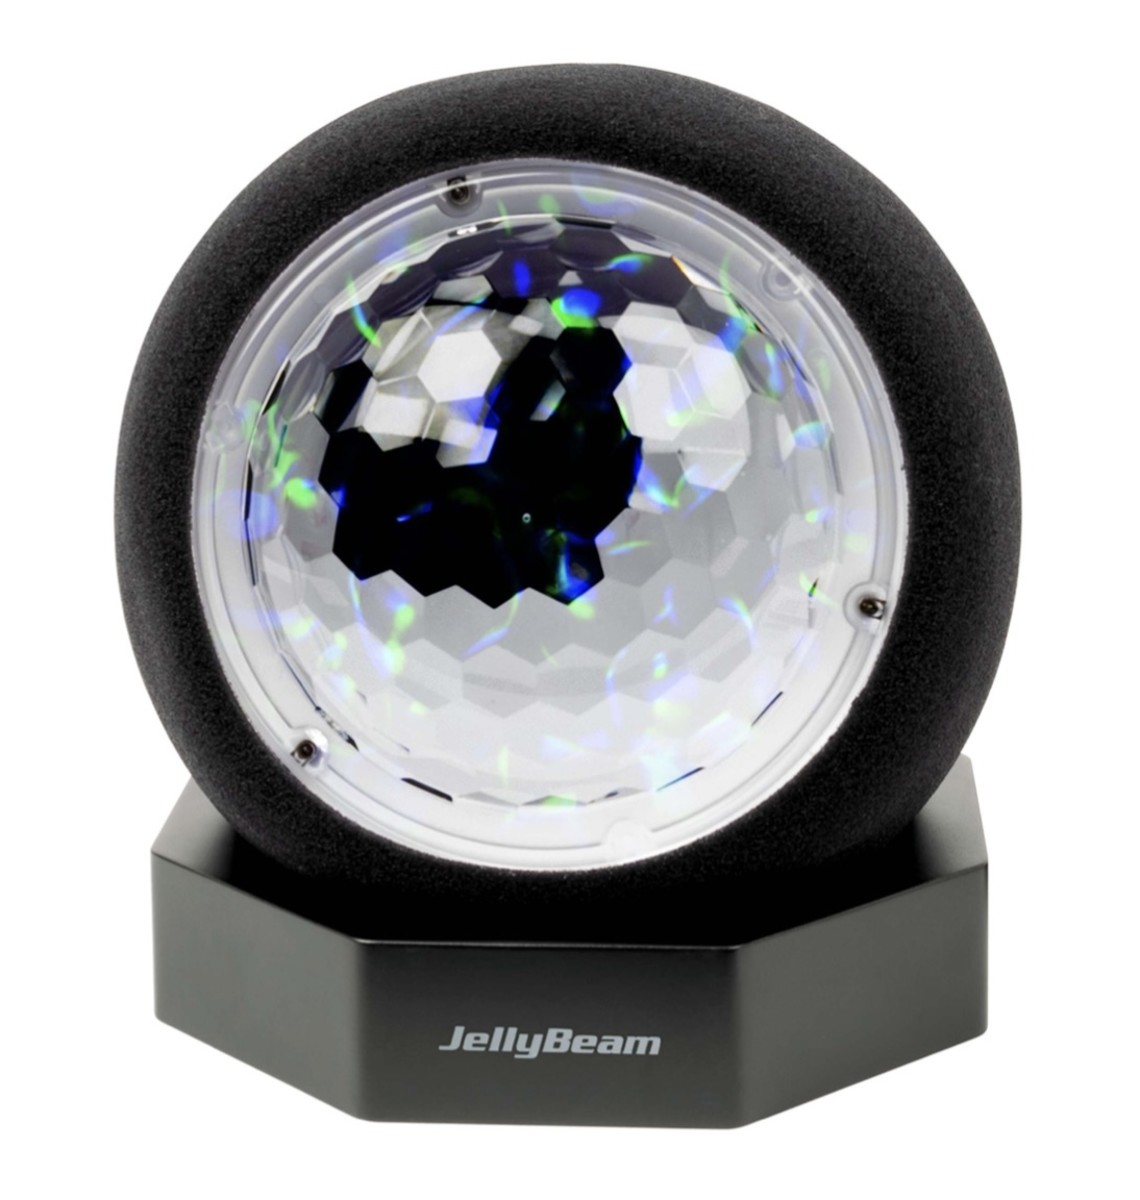 VocoPro’s Jellybeam Is the Moving Led Light With the Jellyfish Effect